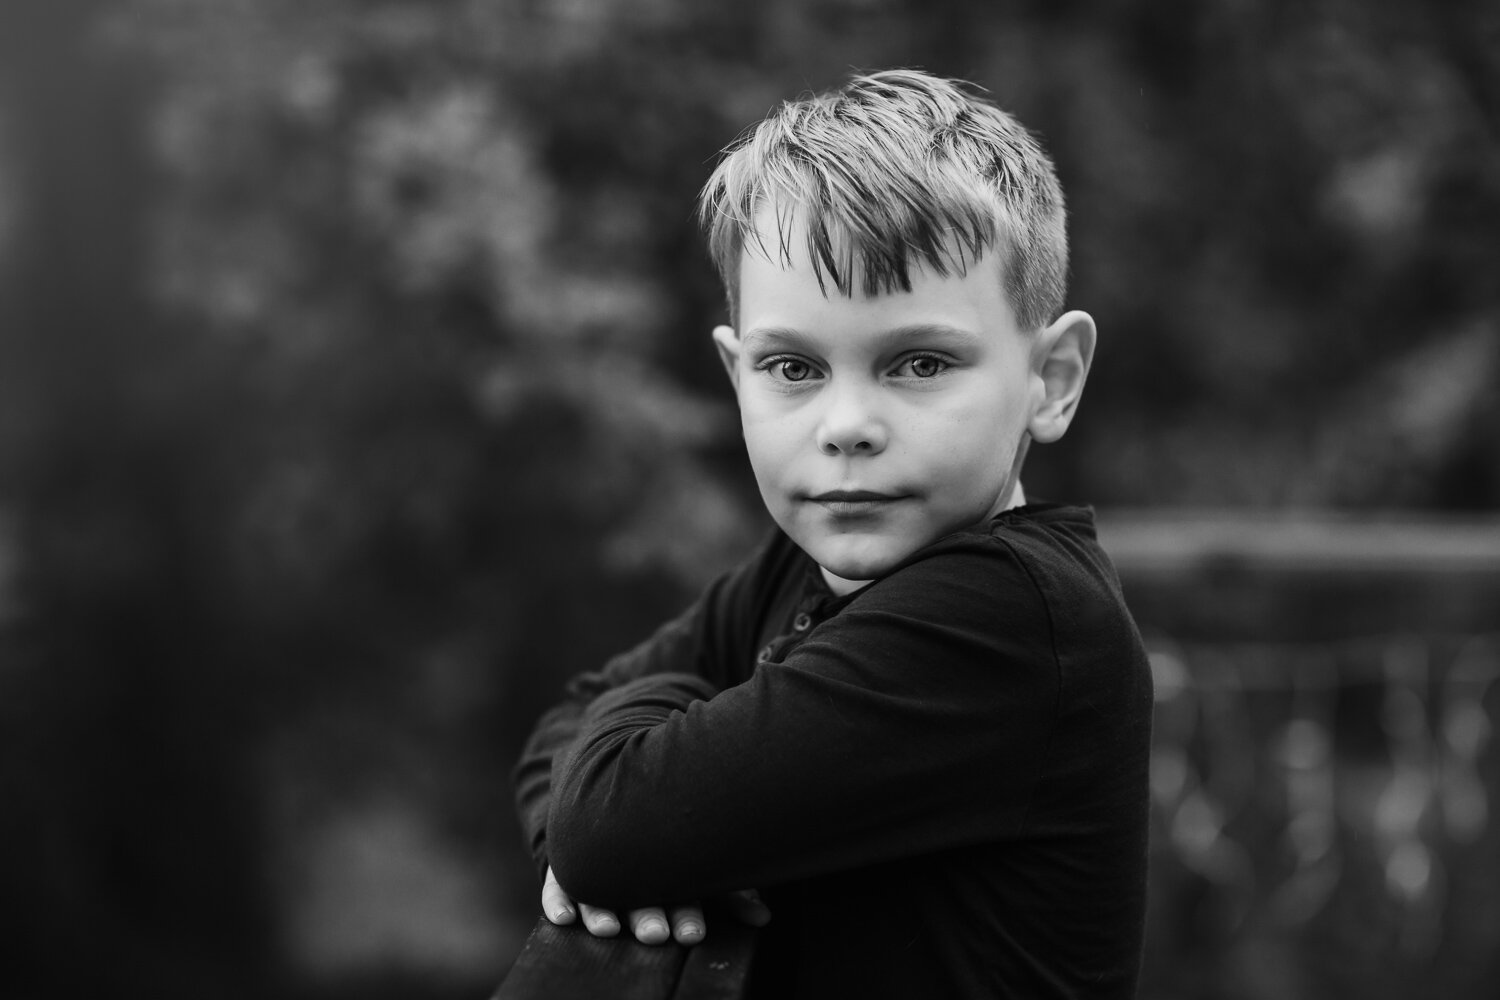 black-and-white-portrait-of-young-boy-by-stockholm-portrait-photographer-sandra-jolly.jpg